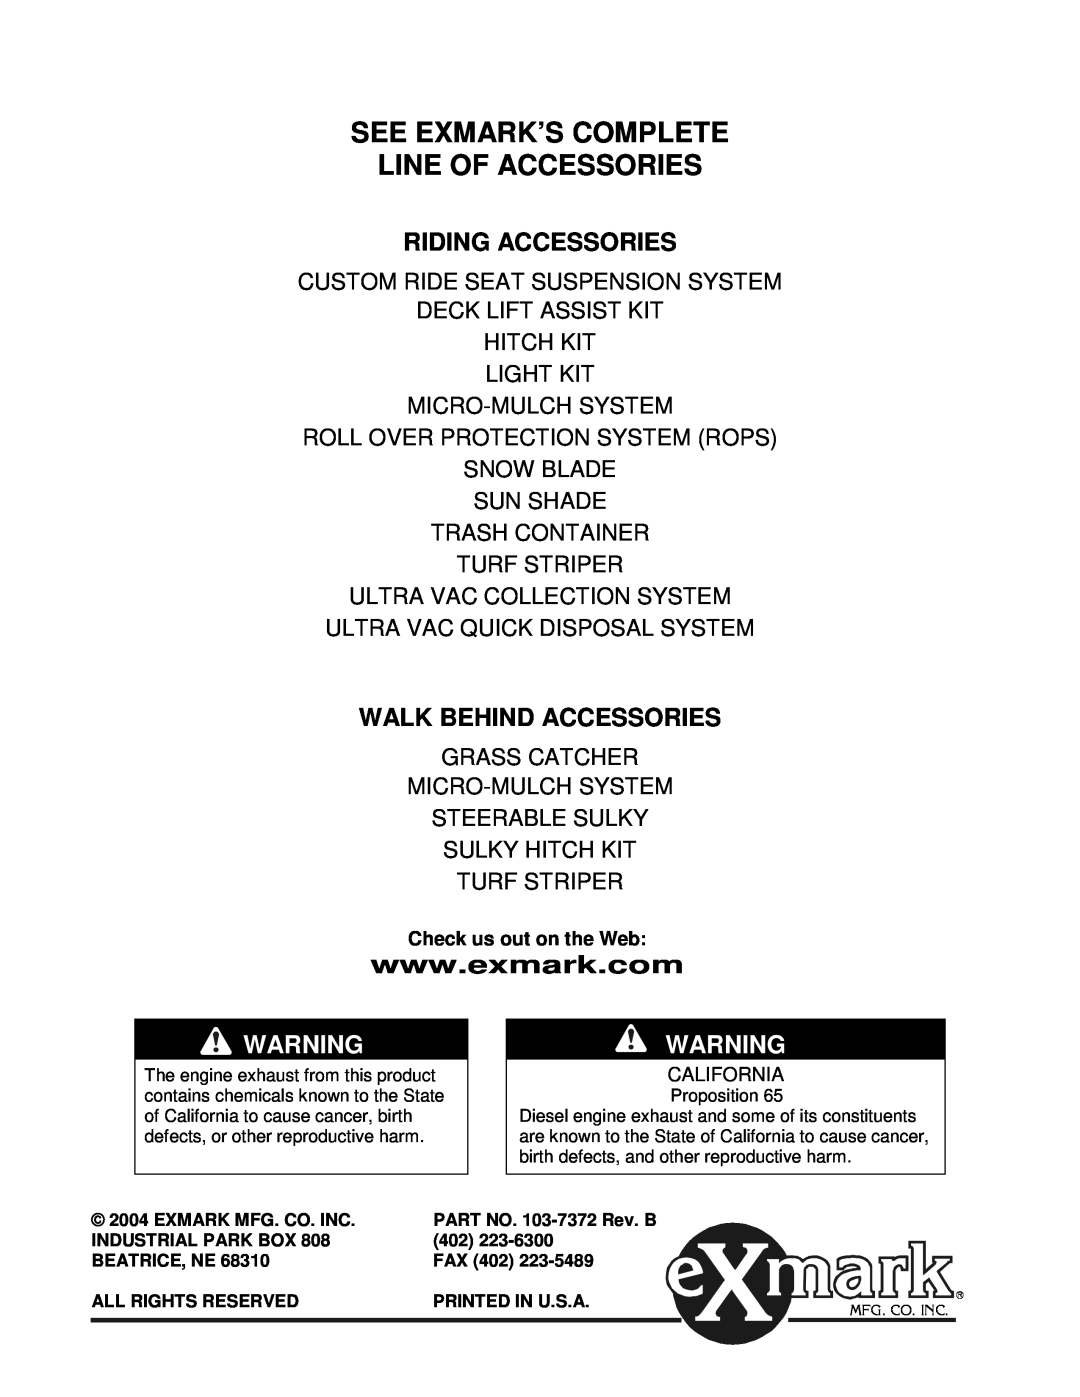 Exmark Lazer Z XP manual Riding Accessories, Walk Behind Accessories, See Exmark’S Complete Line Of Accessories 